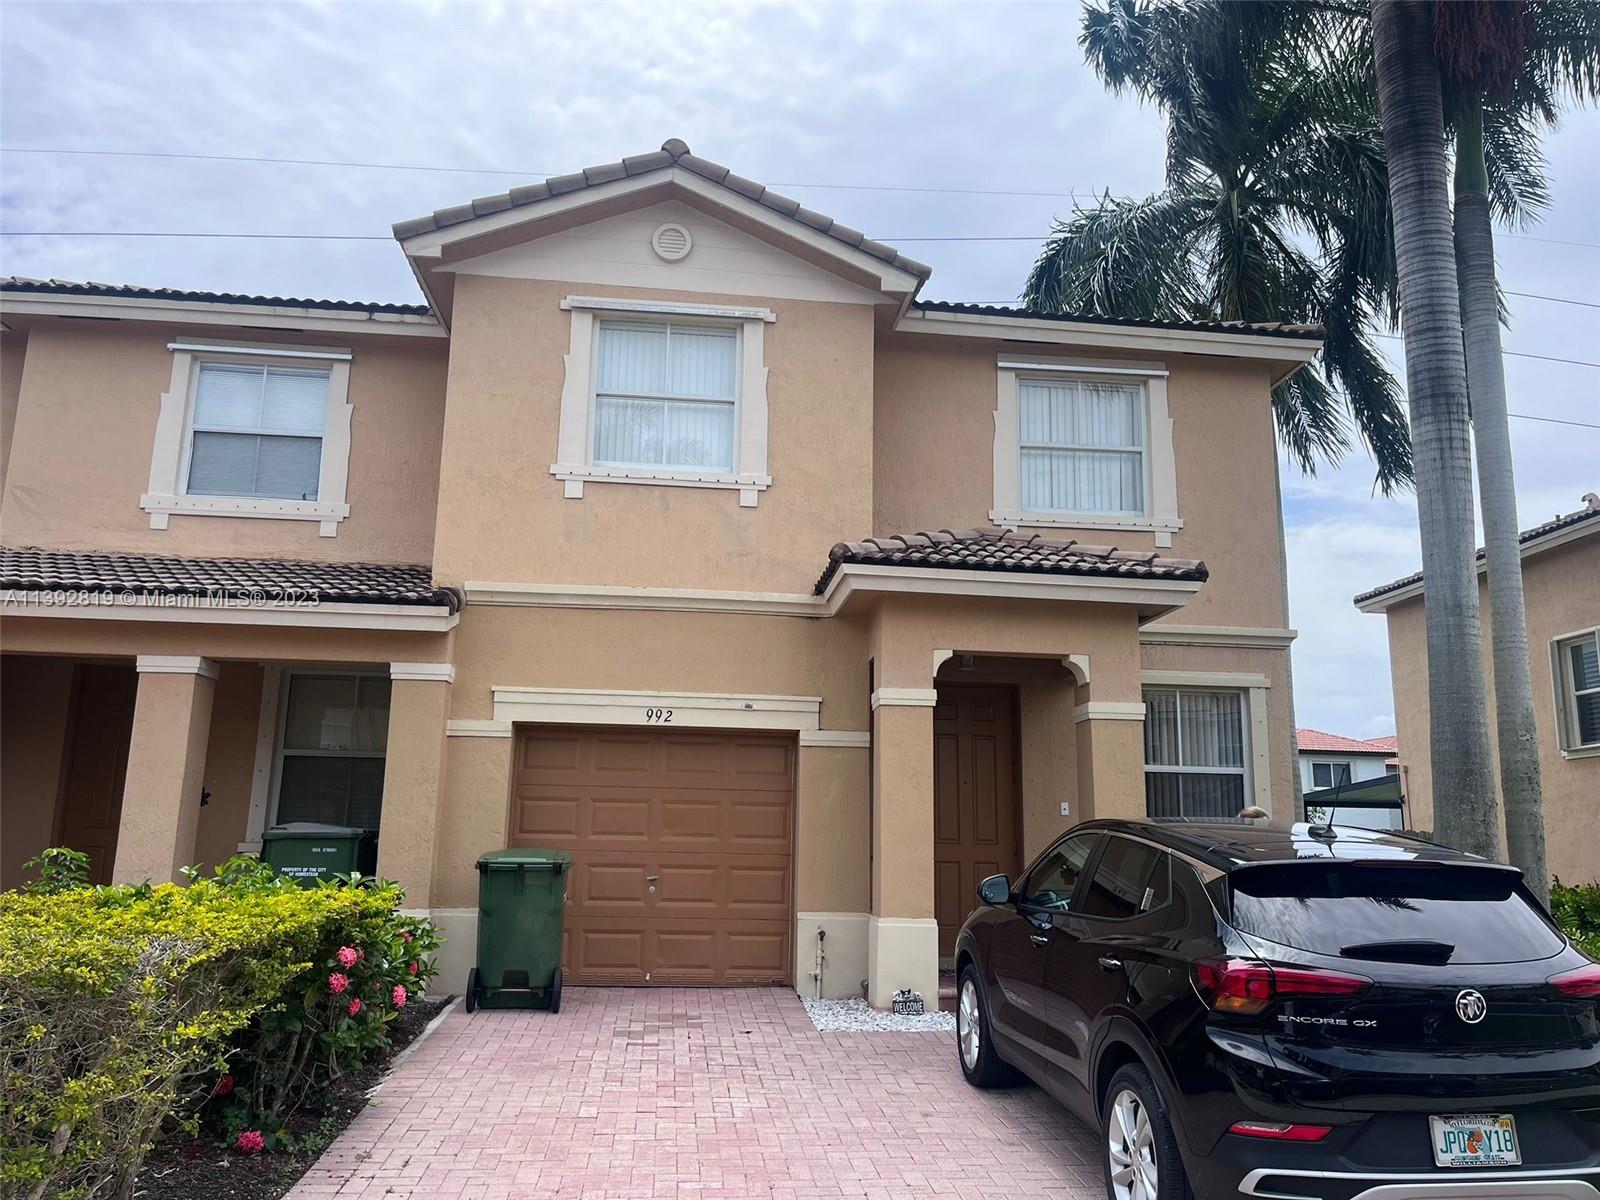 4/2 Townhouse in a gate community with garage fenced backyard. Nicely landscaped. Great for investor. Contact listing office to showing. property is tenant occupied with contract until 06/30/2024, The current tenant rent is $2,400.00.